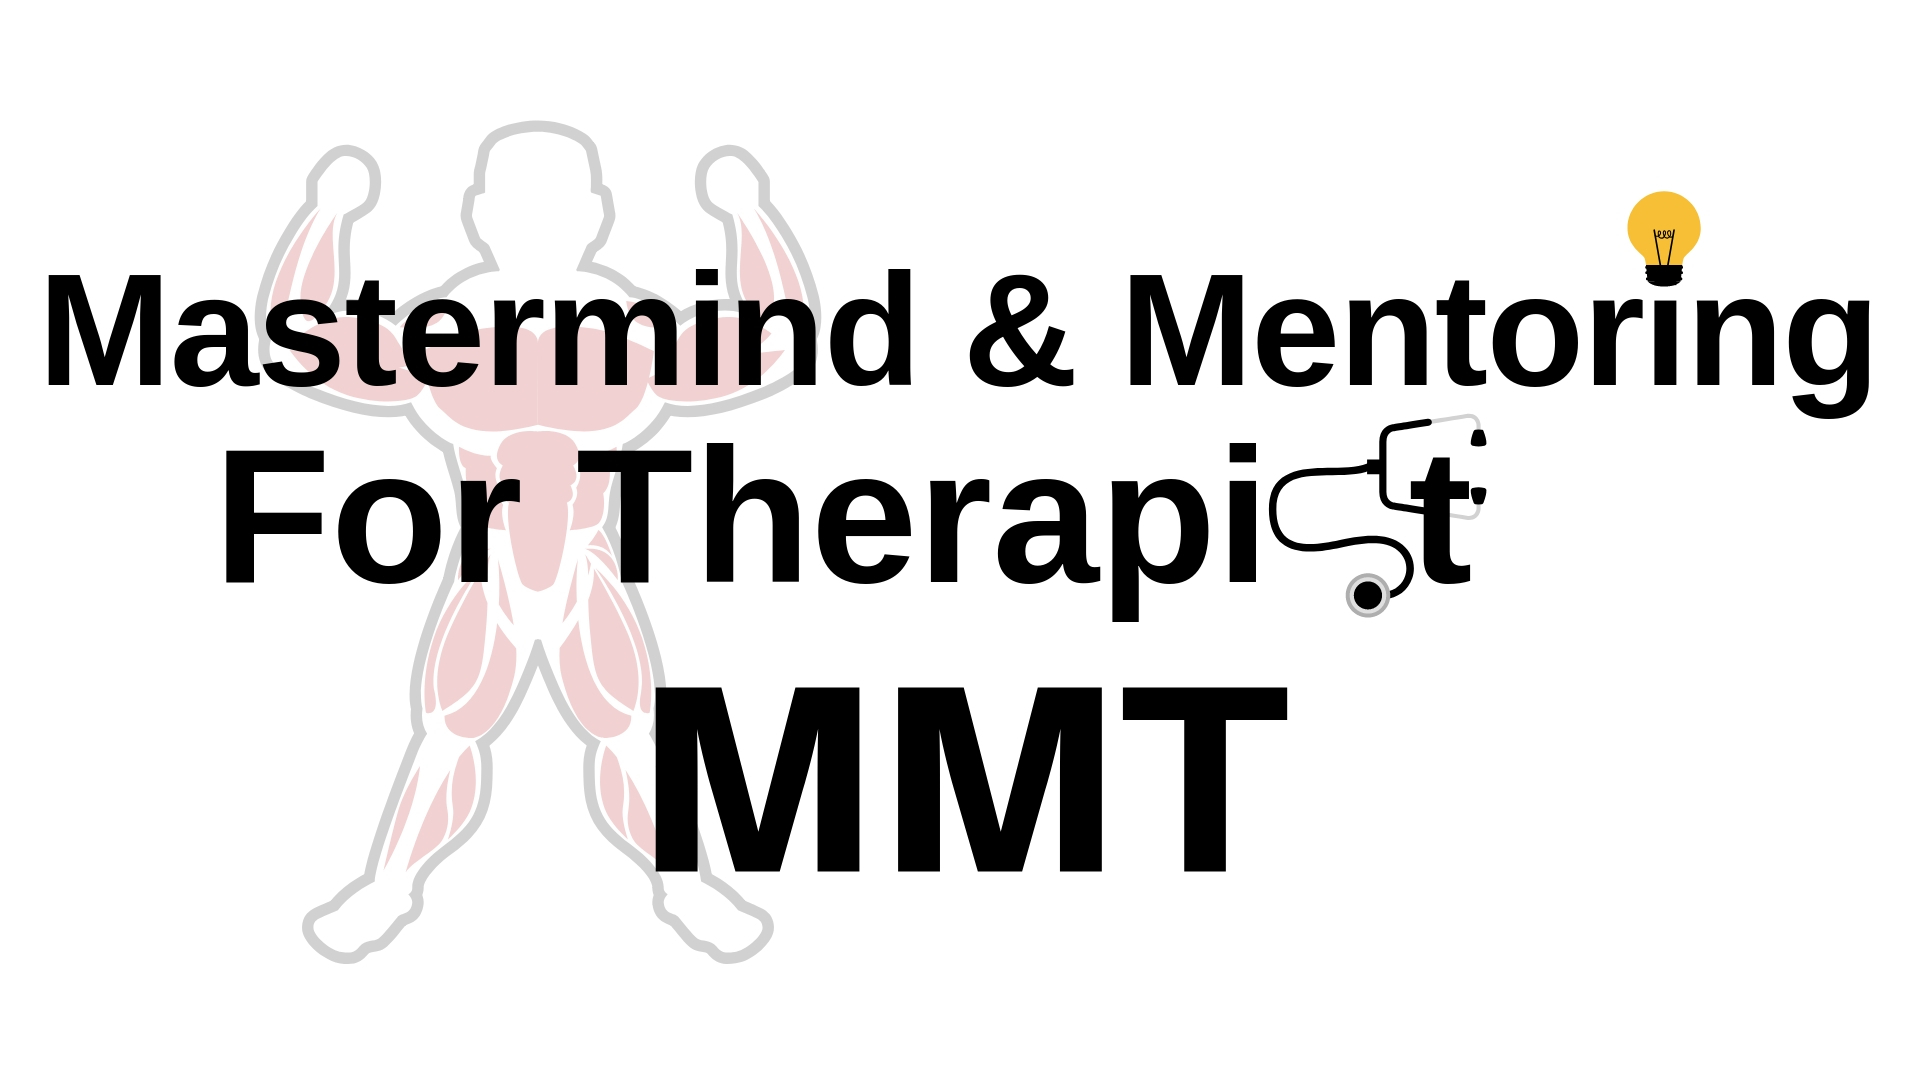 Mastermind and mentoring for therapist